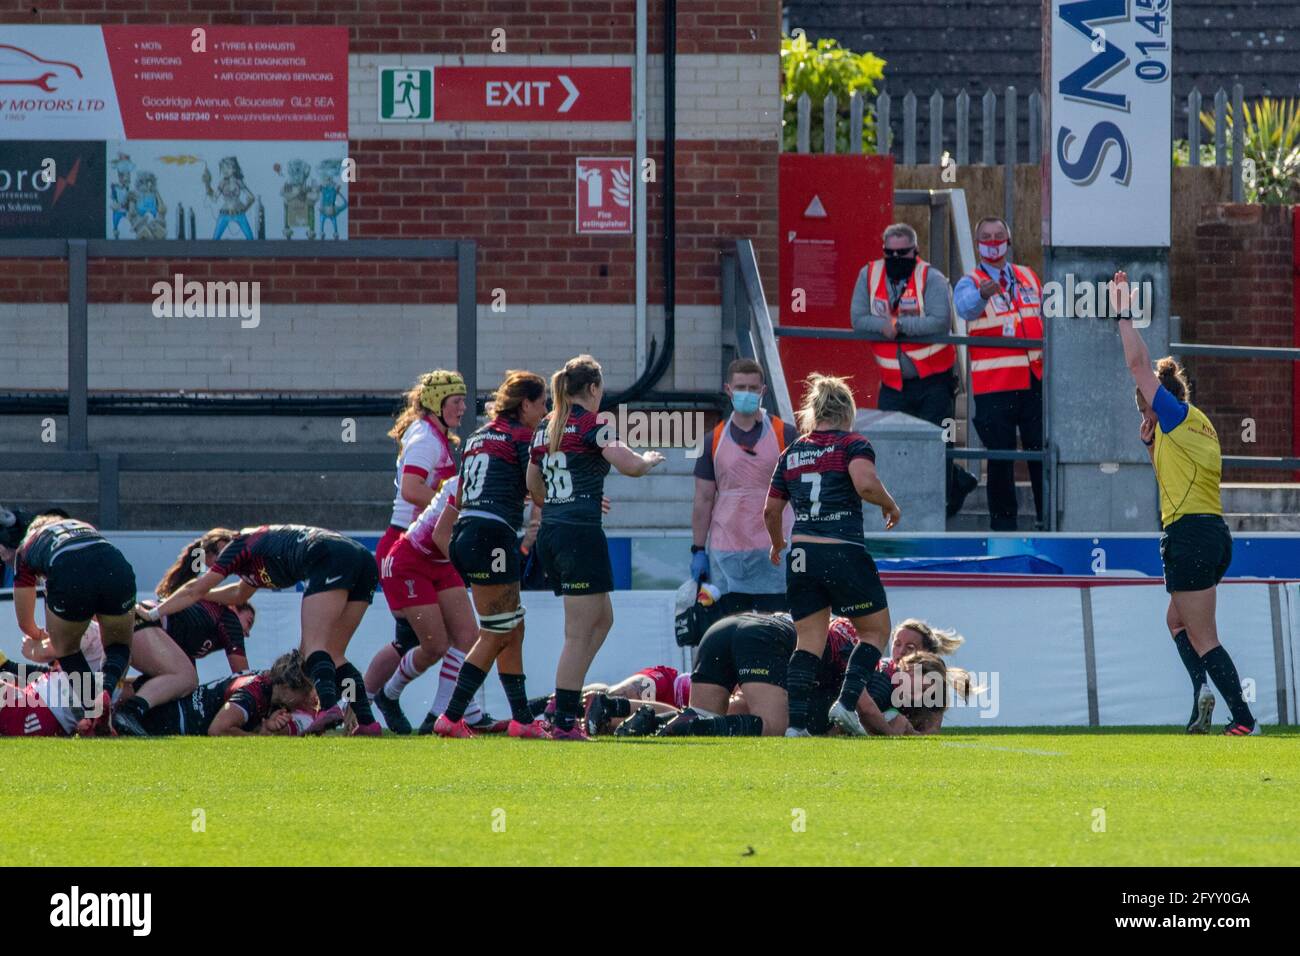 Gloucester, UK. 30th May, 2021. Sophie de Goede (4 Saracens Women) scores a try during the Allianz Premier 15s Final between Saracens Women and Harlequins Women at Kingsholm Stadium in Gloucester, England. Credit: SPP Sport Press Photo. /Alamy Live News Stock Photo